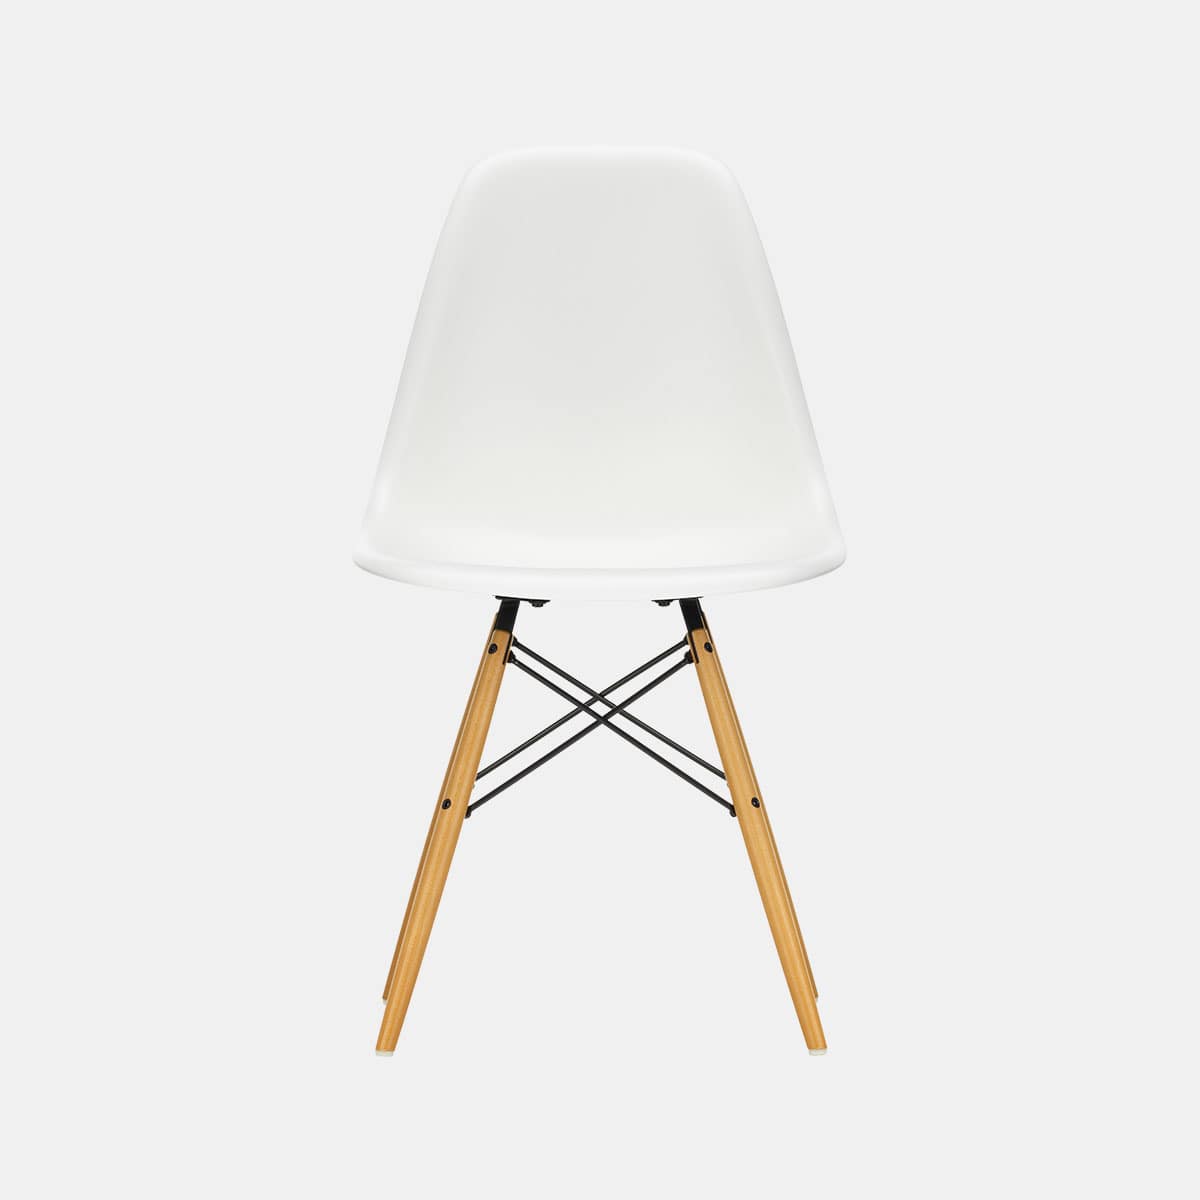 vitra-charles-ray-eames-plastic-side-chair-dsw-wit-esdoorn-gelig-001shop